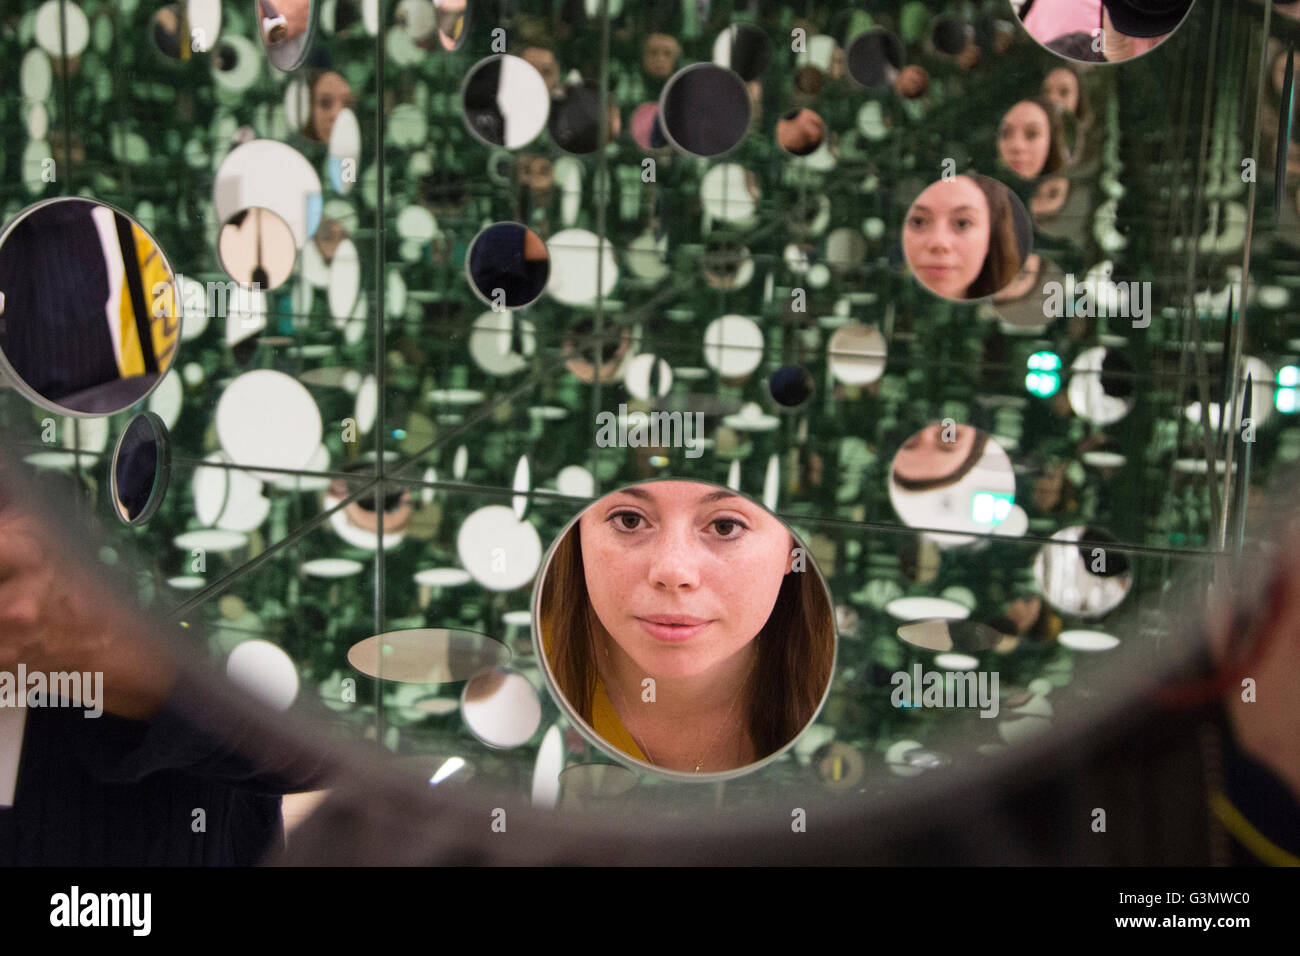 London, UK. 14 June 2016. Artwork The Passing Winter, 2005, by Yayoi Kusama. Press preview of the new Tate Modern which will open to the public this weekend. Credit:  ukartpics/Alamy Live News Stock Photo